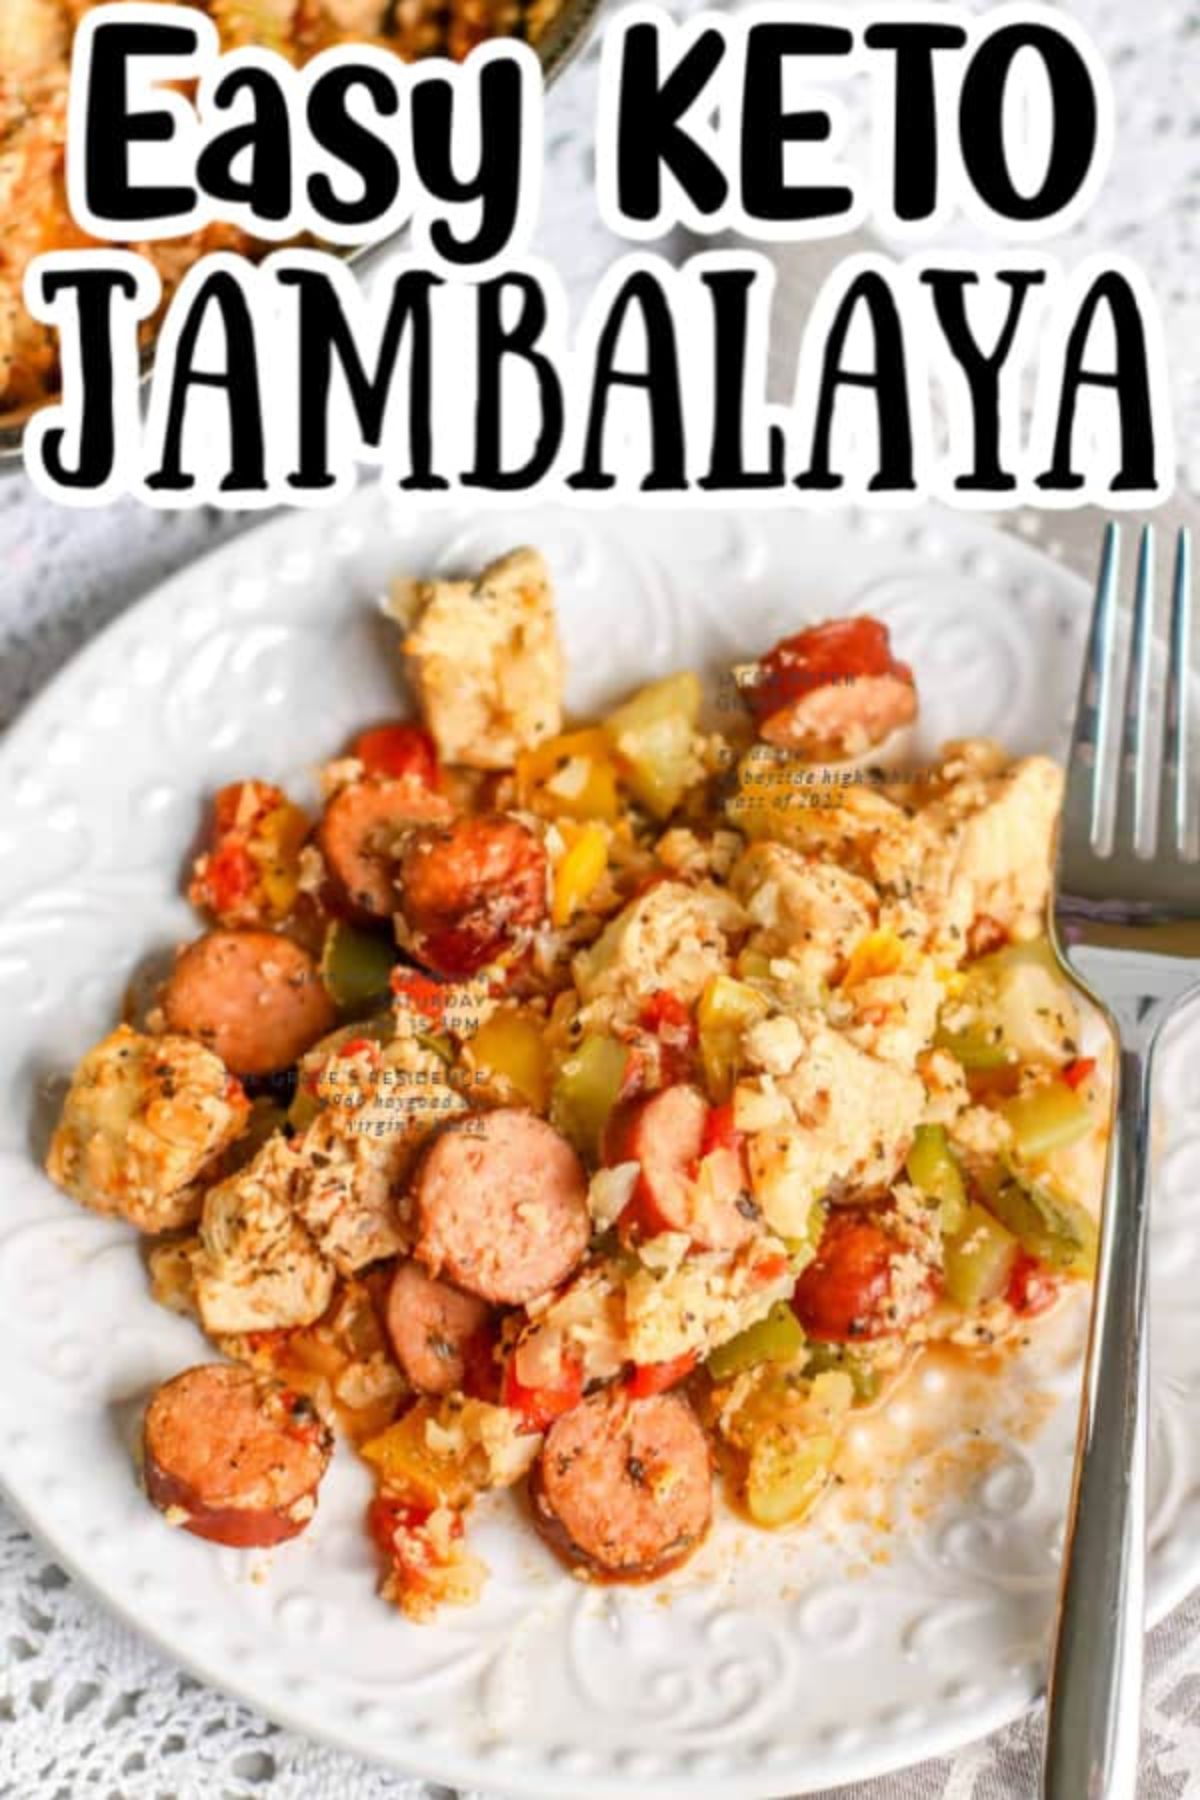 The text reads "Easy Keto Jambalaya". A white plate has a pile of jambalaya on it and a metal fork to the side